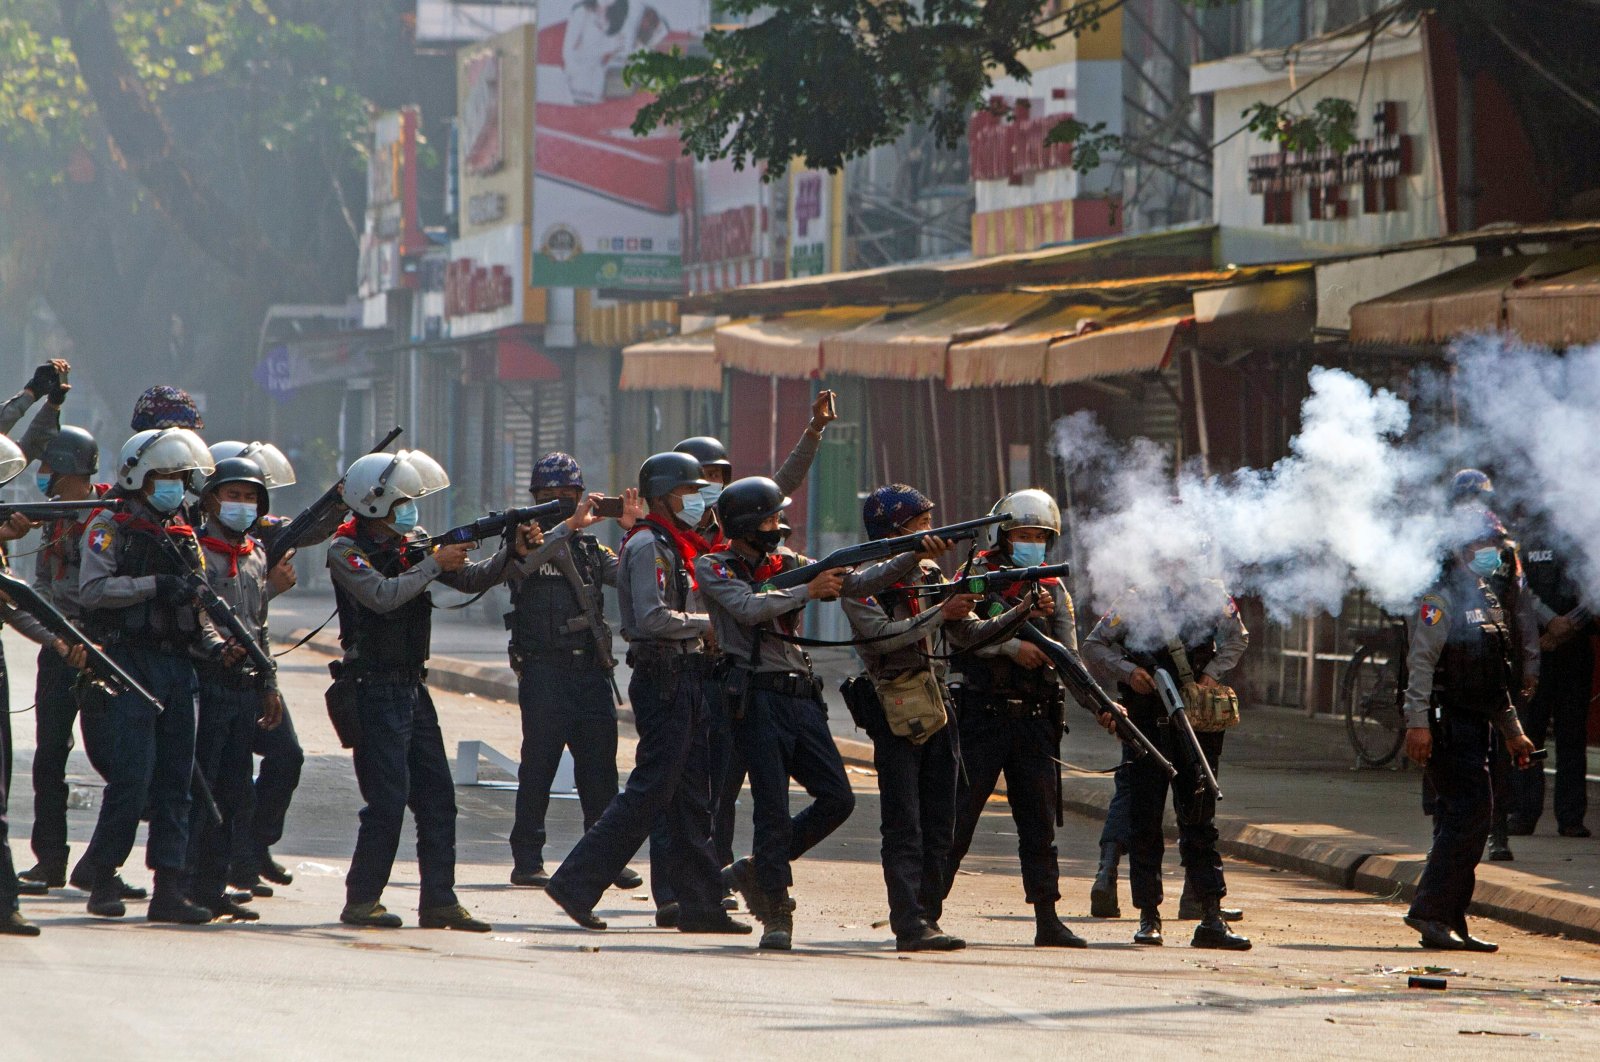 Riot police officers fire tear gas canisters during a protest against the military coup in Yangon, Myanmar, Feb. 28, 2021. (Reuters Photo)